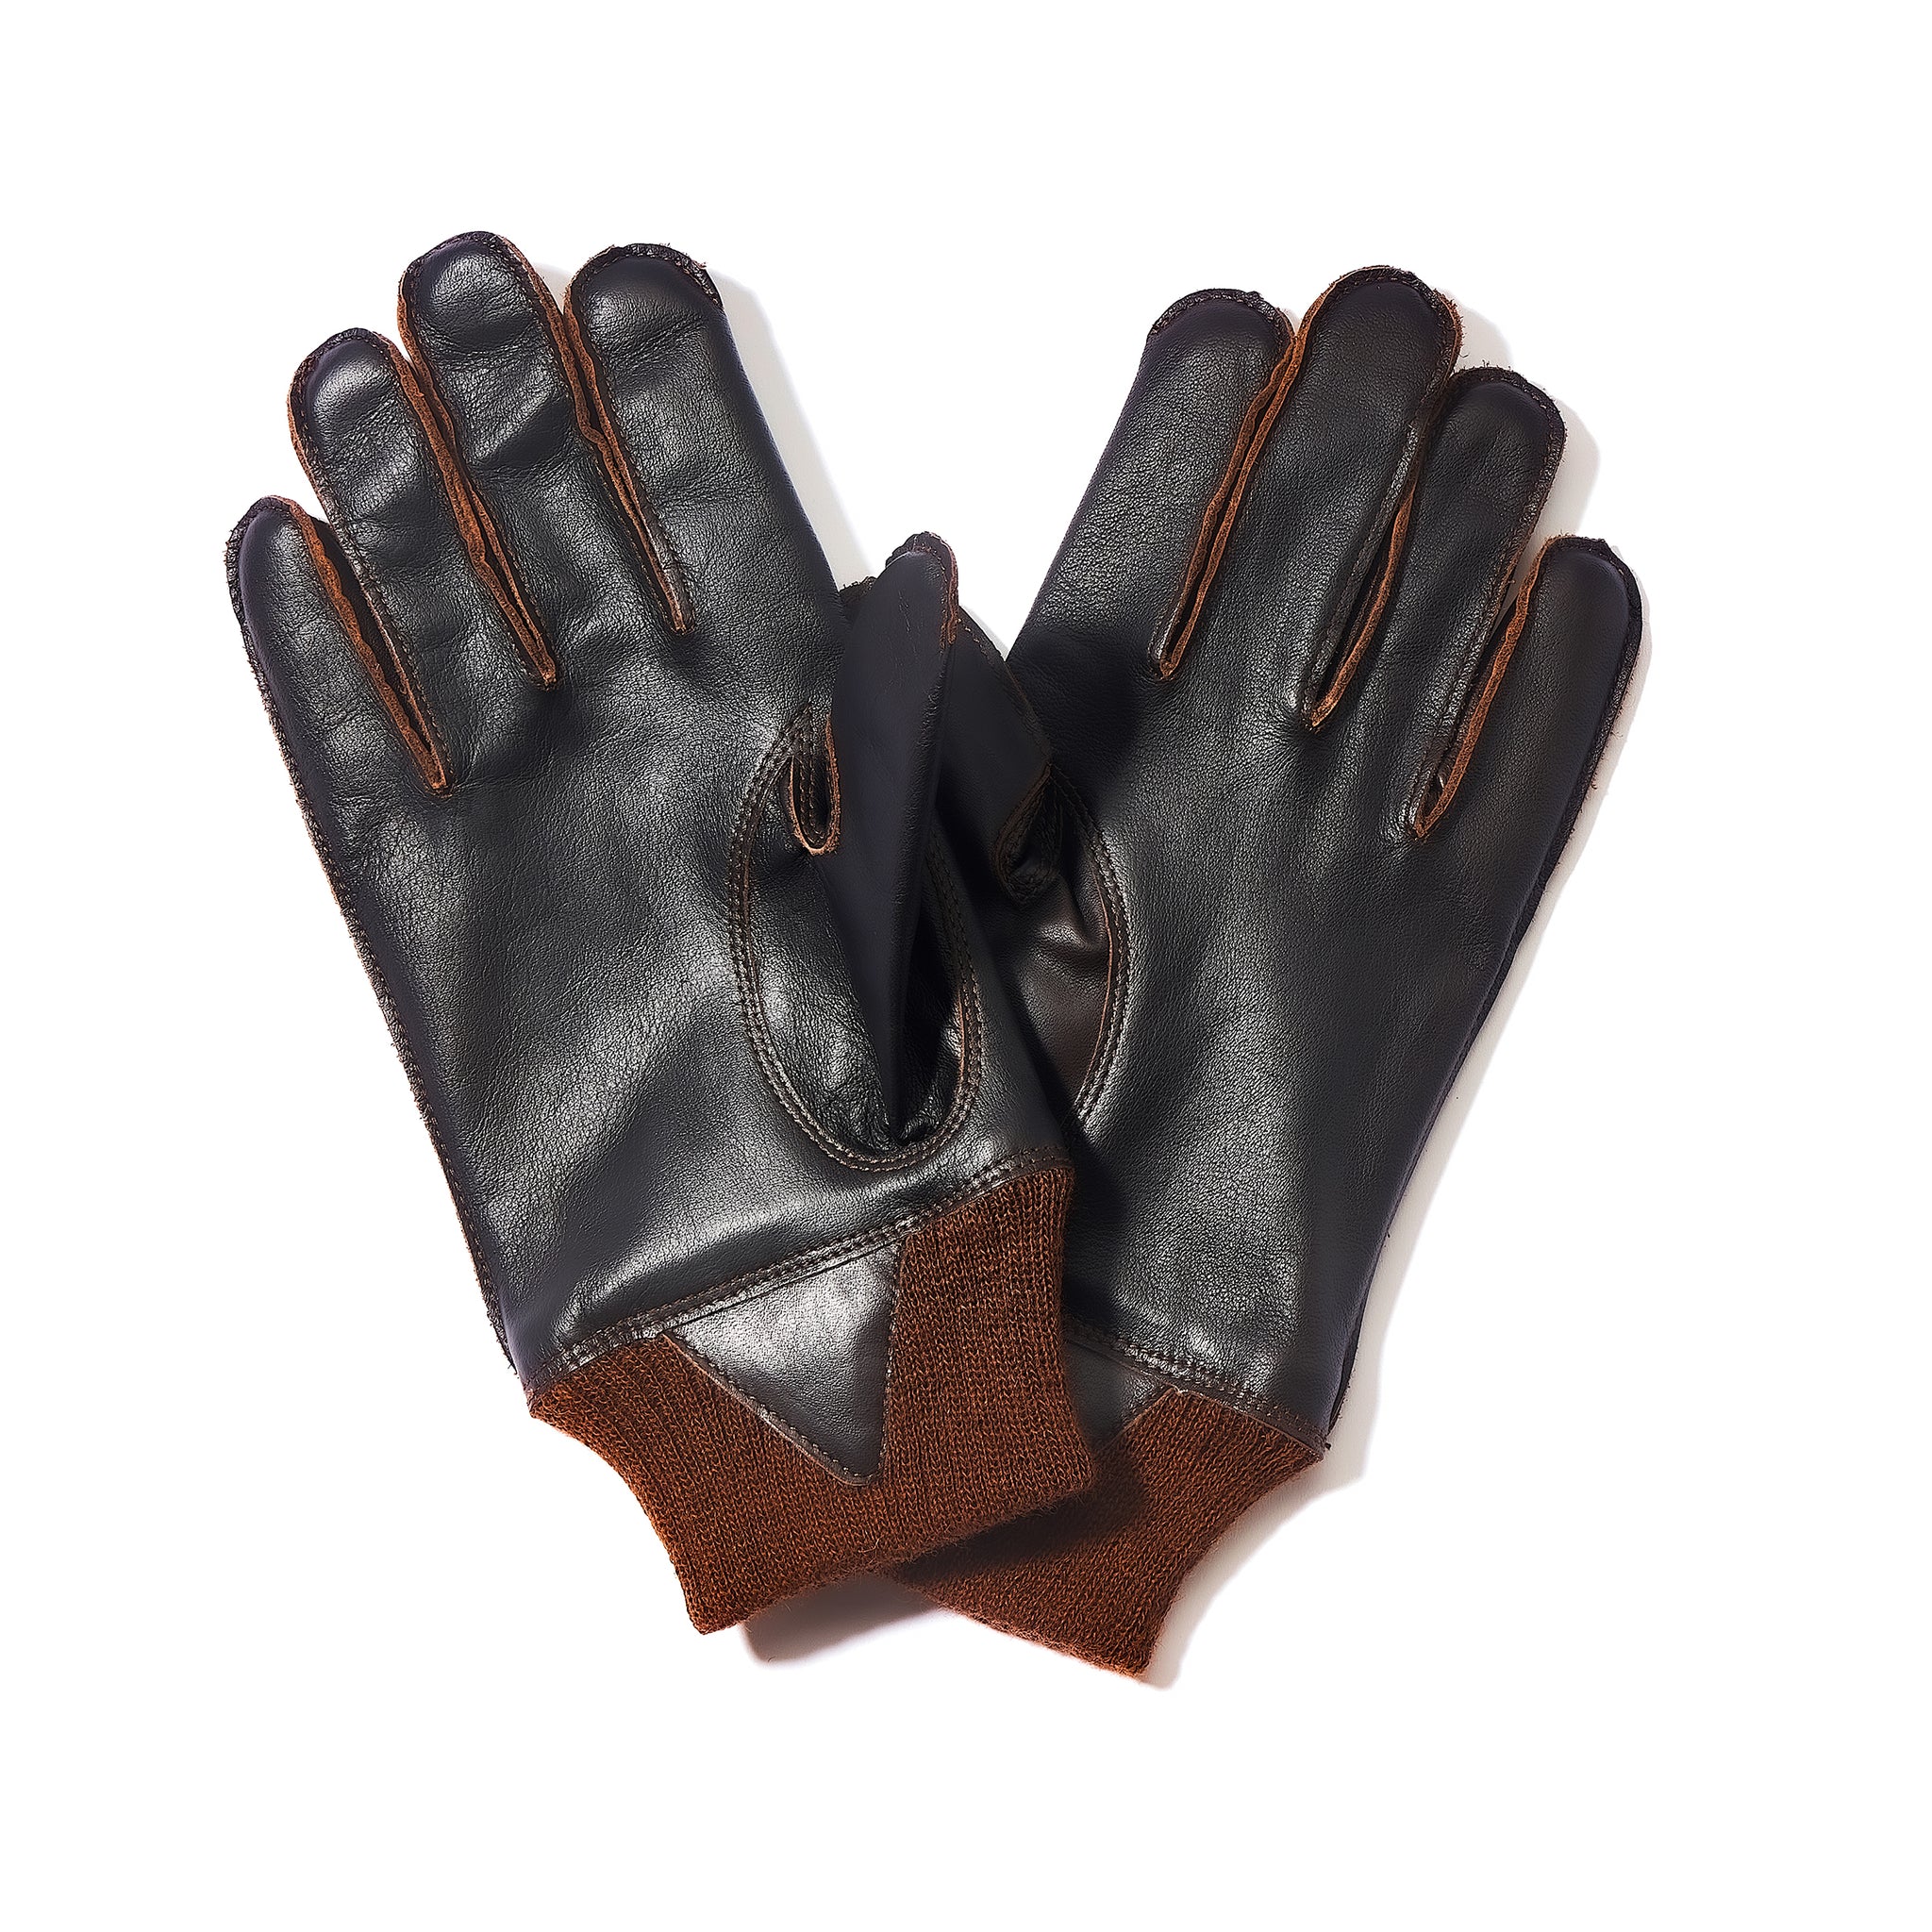 TYPE A-10 GLOVE, FLYING WINTER